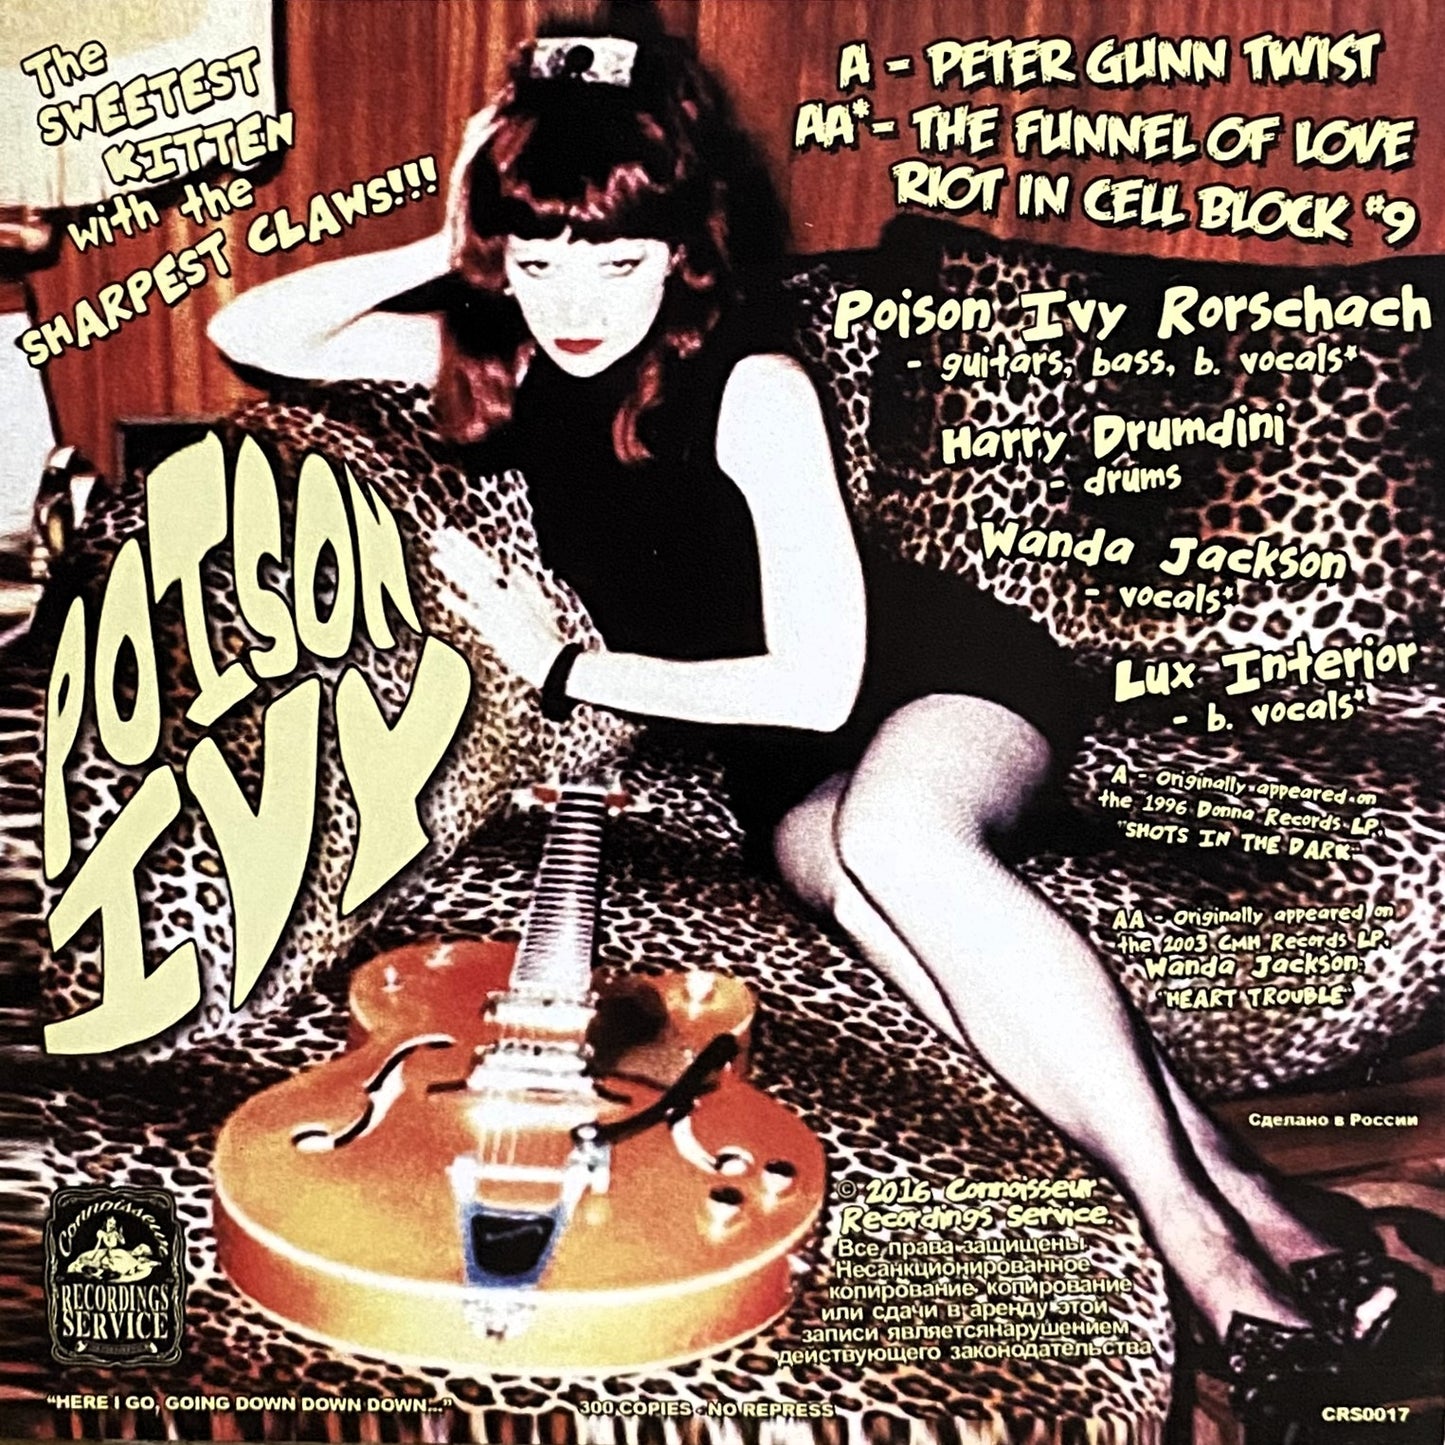 POISON IVY – The Sweetest Kitten With The Sharpest Claws 7" (cherry red translucent vinyl)